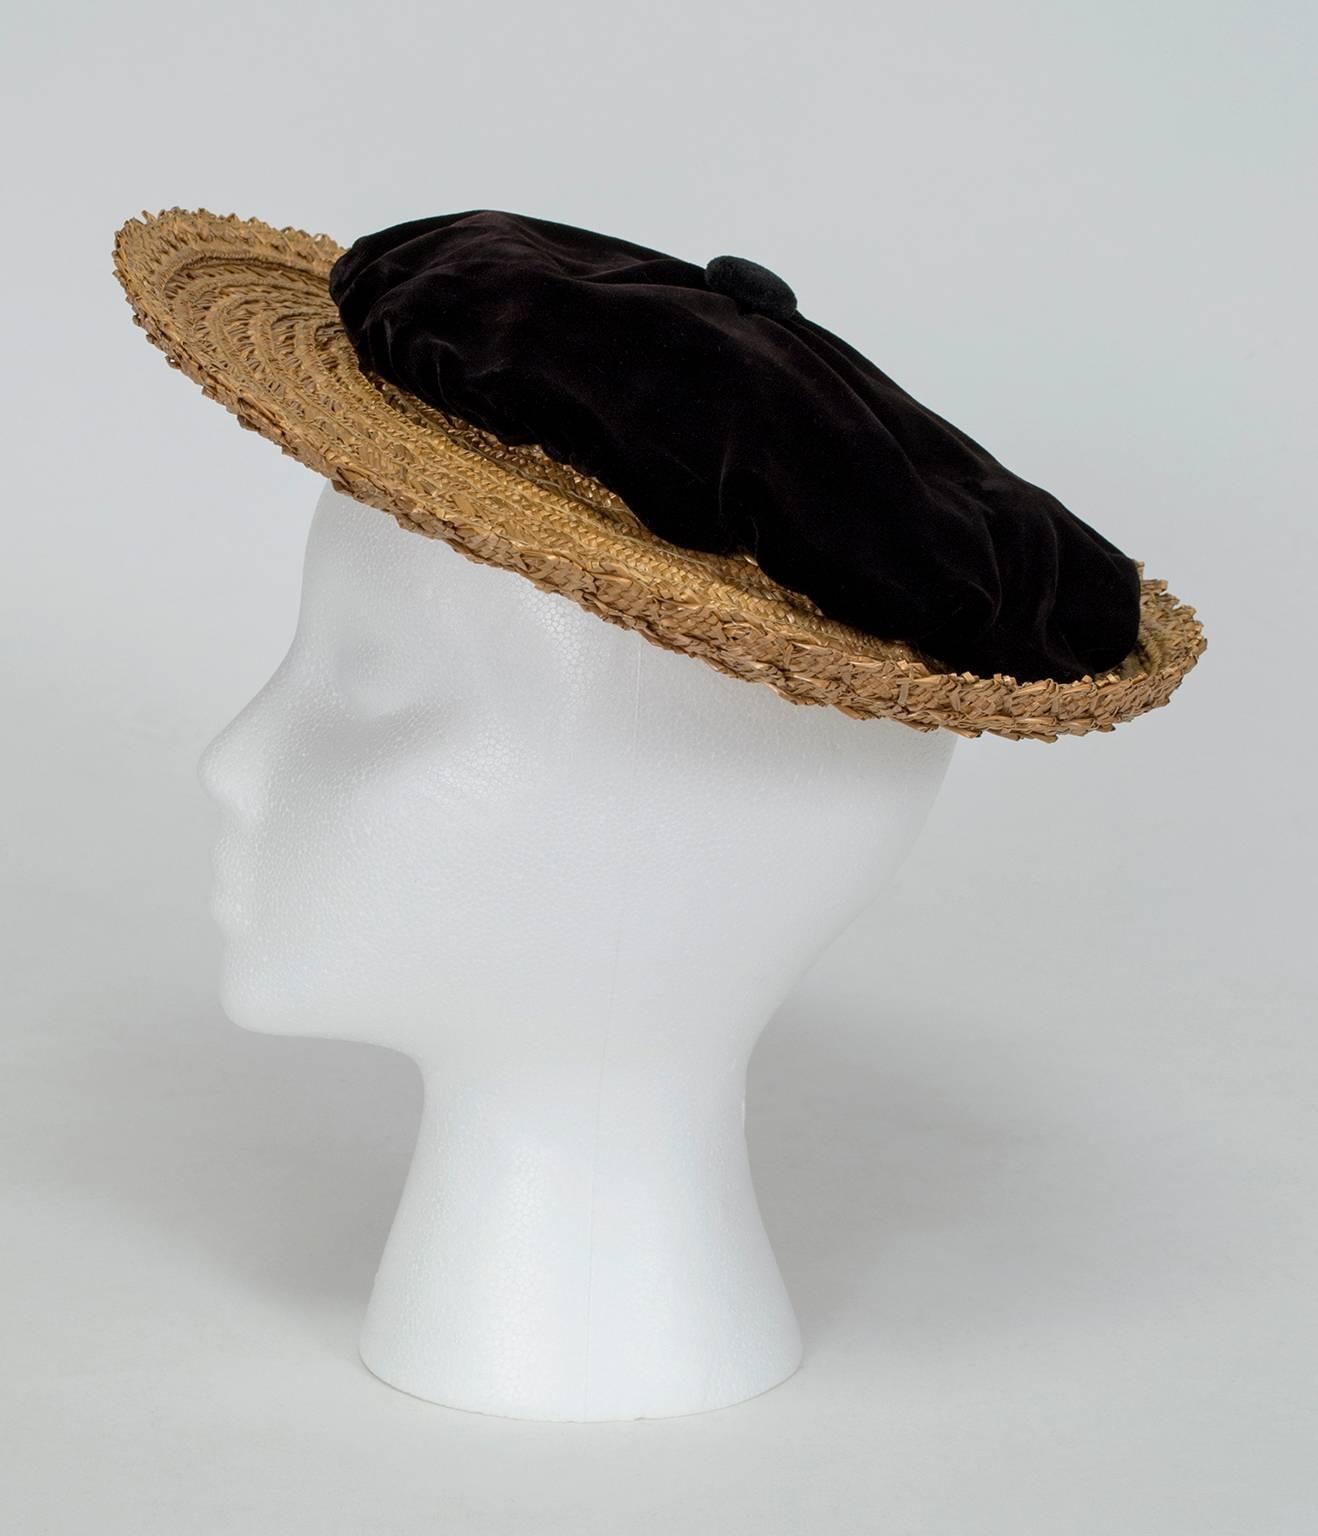 So much like the shallow boaters on which Gabrielle Chanel cut her teeth, with the added feature of an unstructured velvet crown to keep it feminine. One part beret, one part boater and 100% chic.

Natural coarse straw saucer hat with black